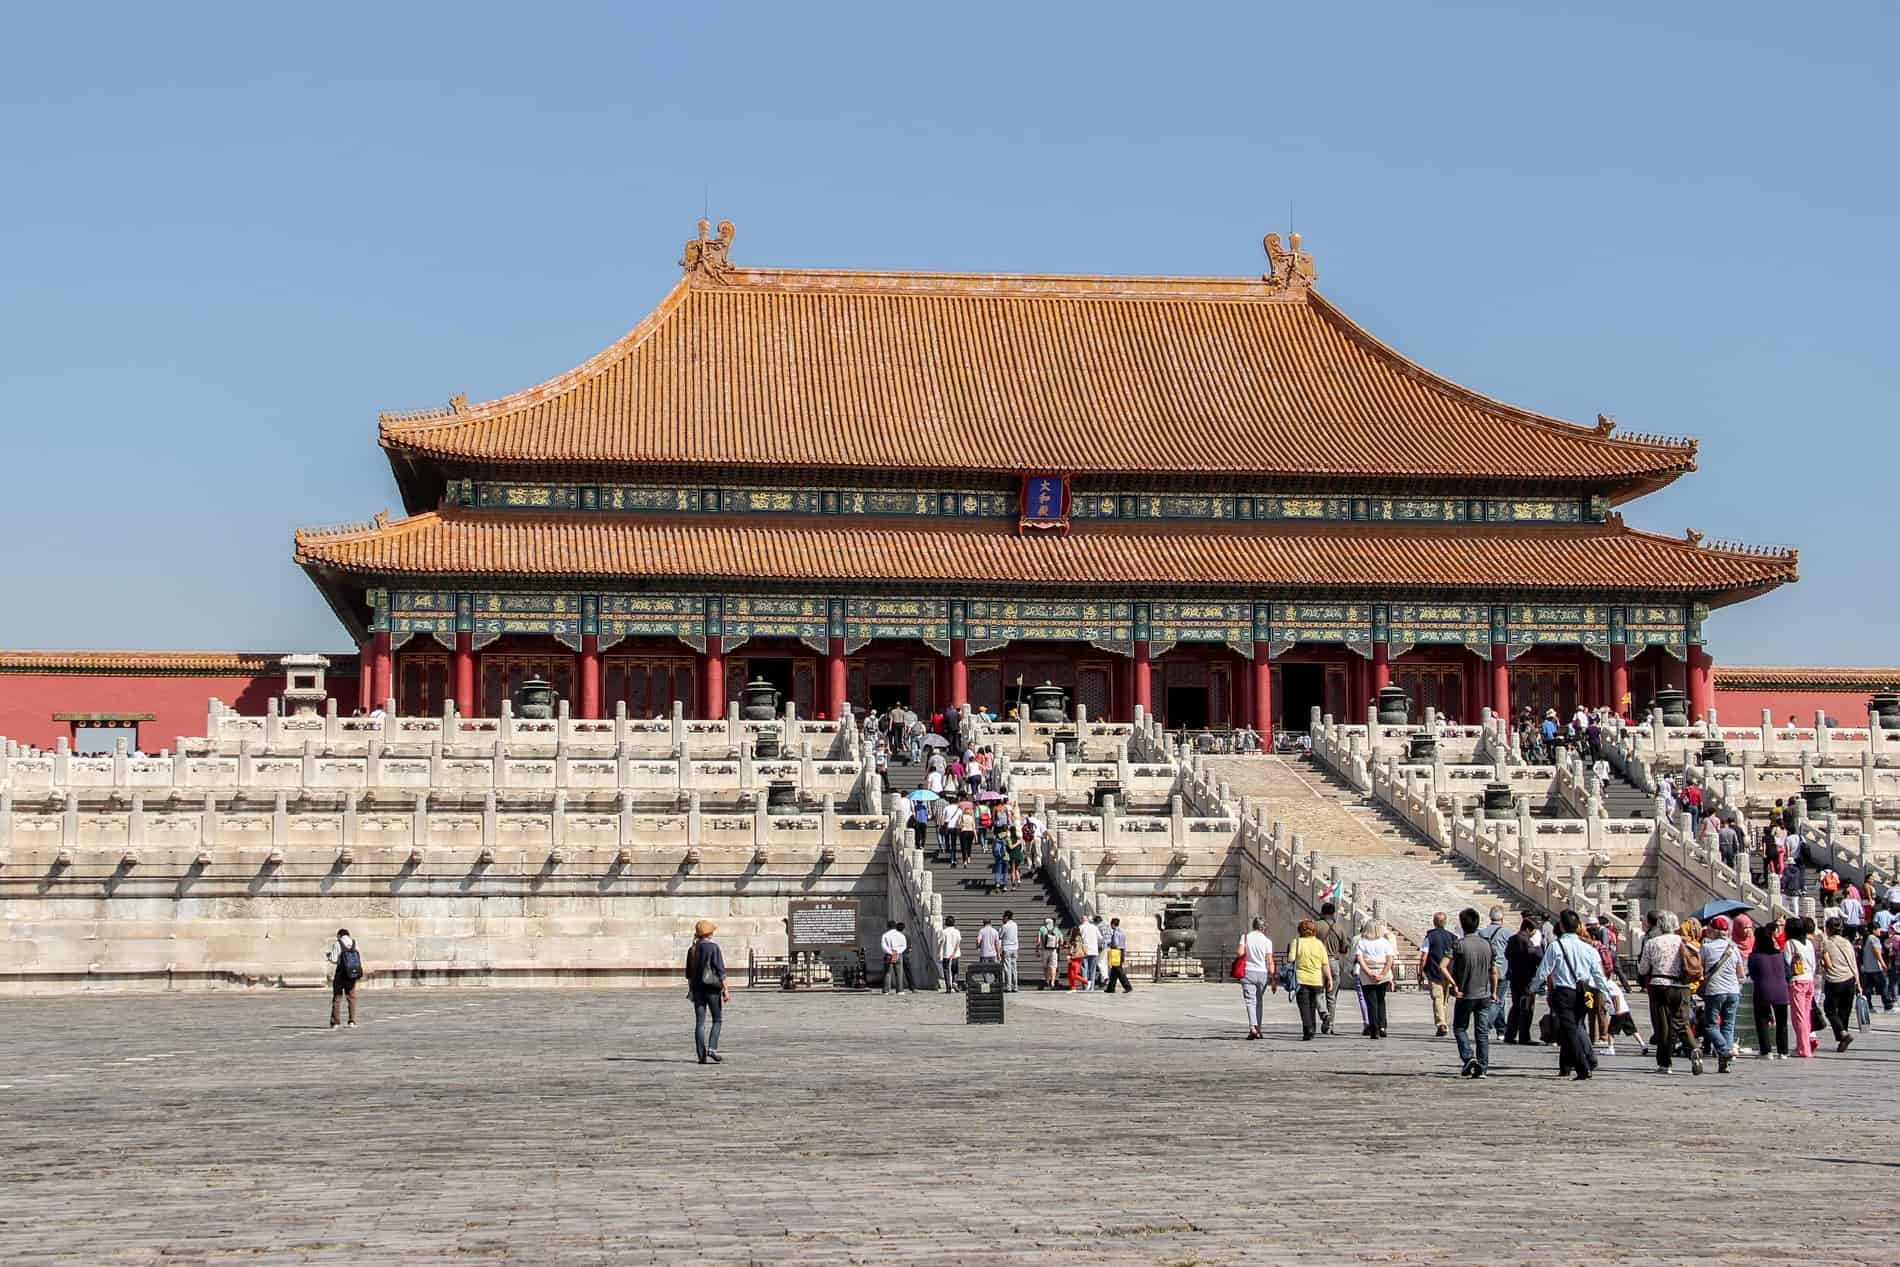 Groups of people walk towards and up the stone steps of a Chinese pagoda style building in the Forbidden City palace complex in China. 